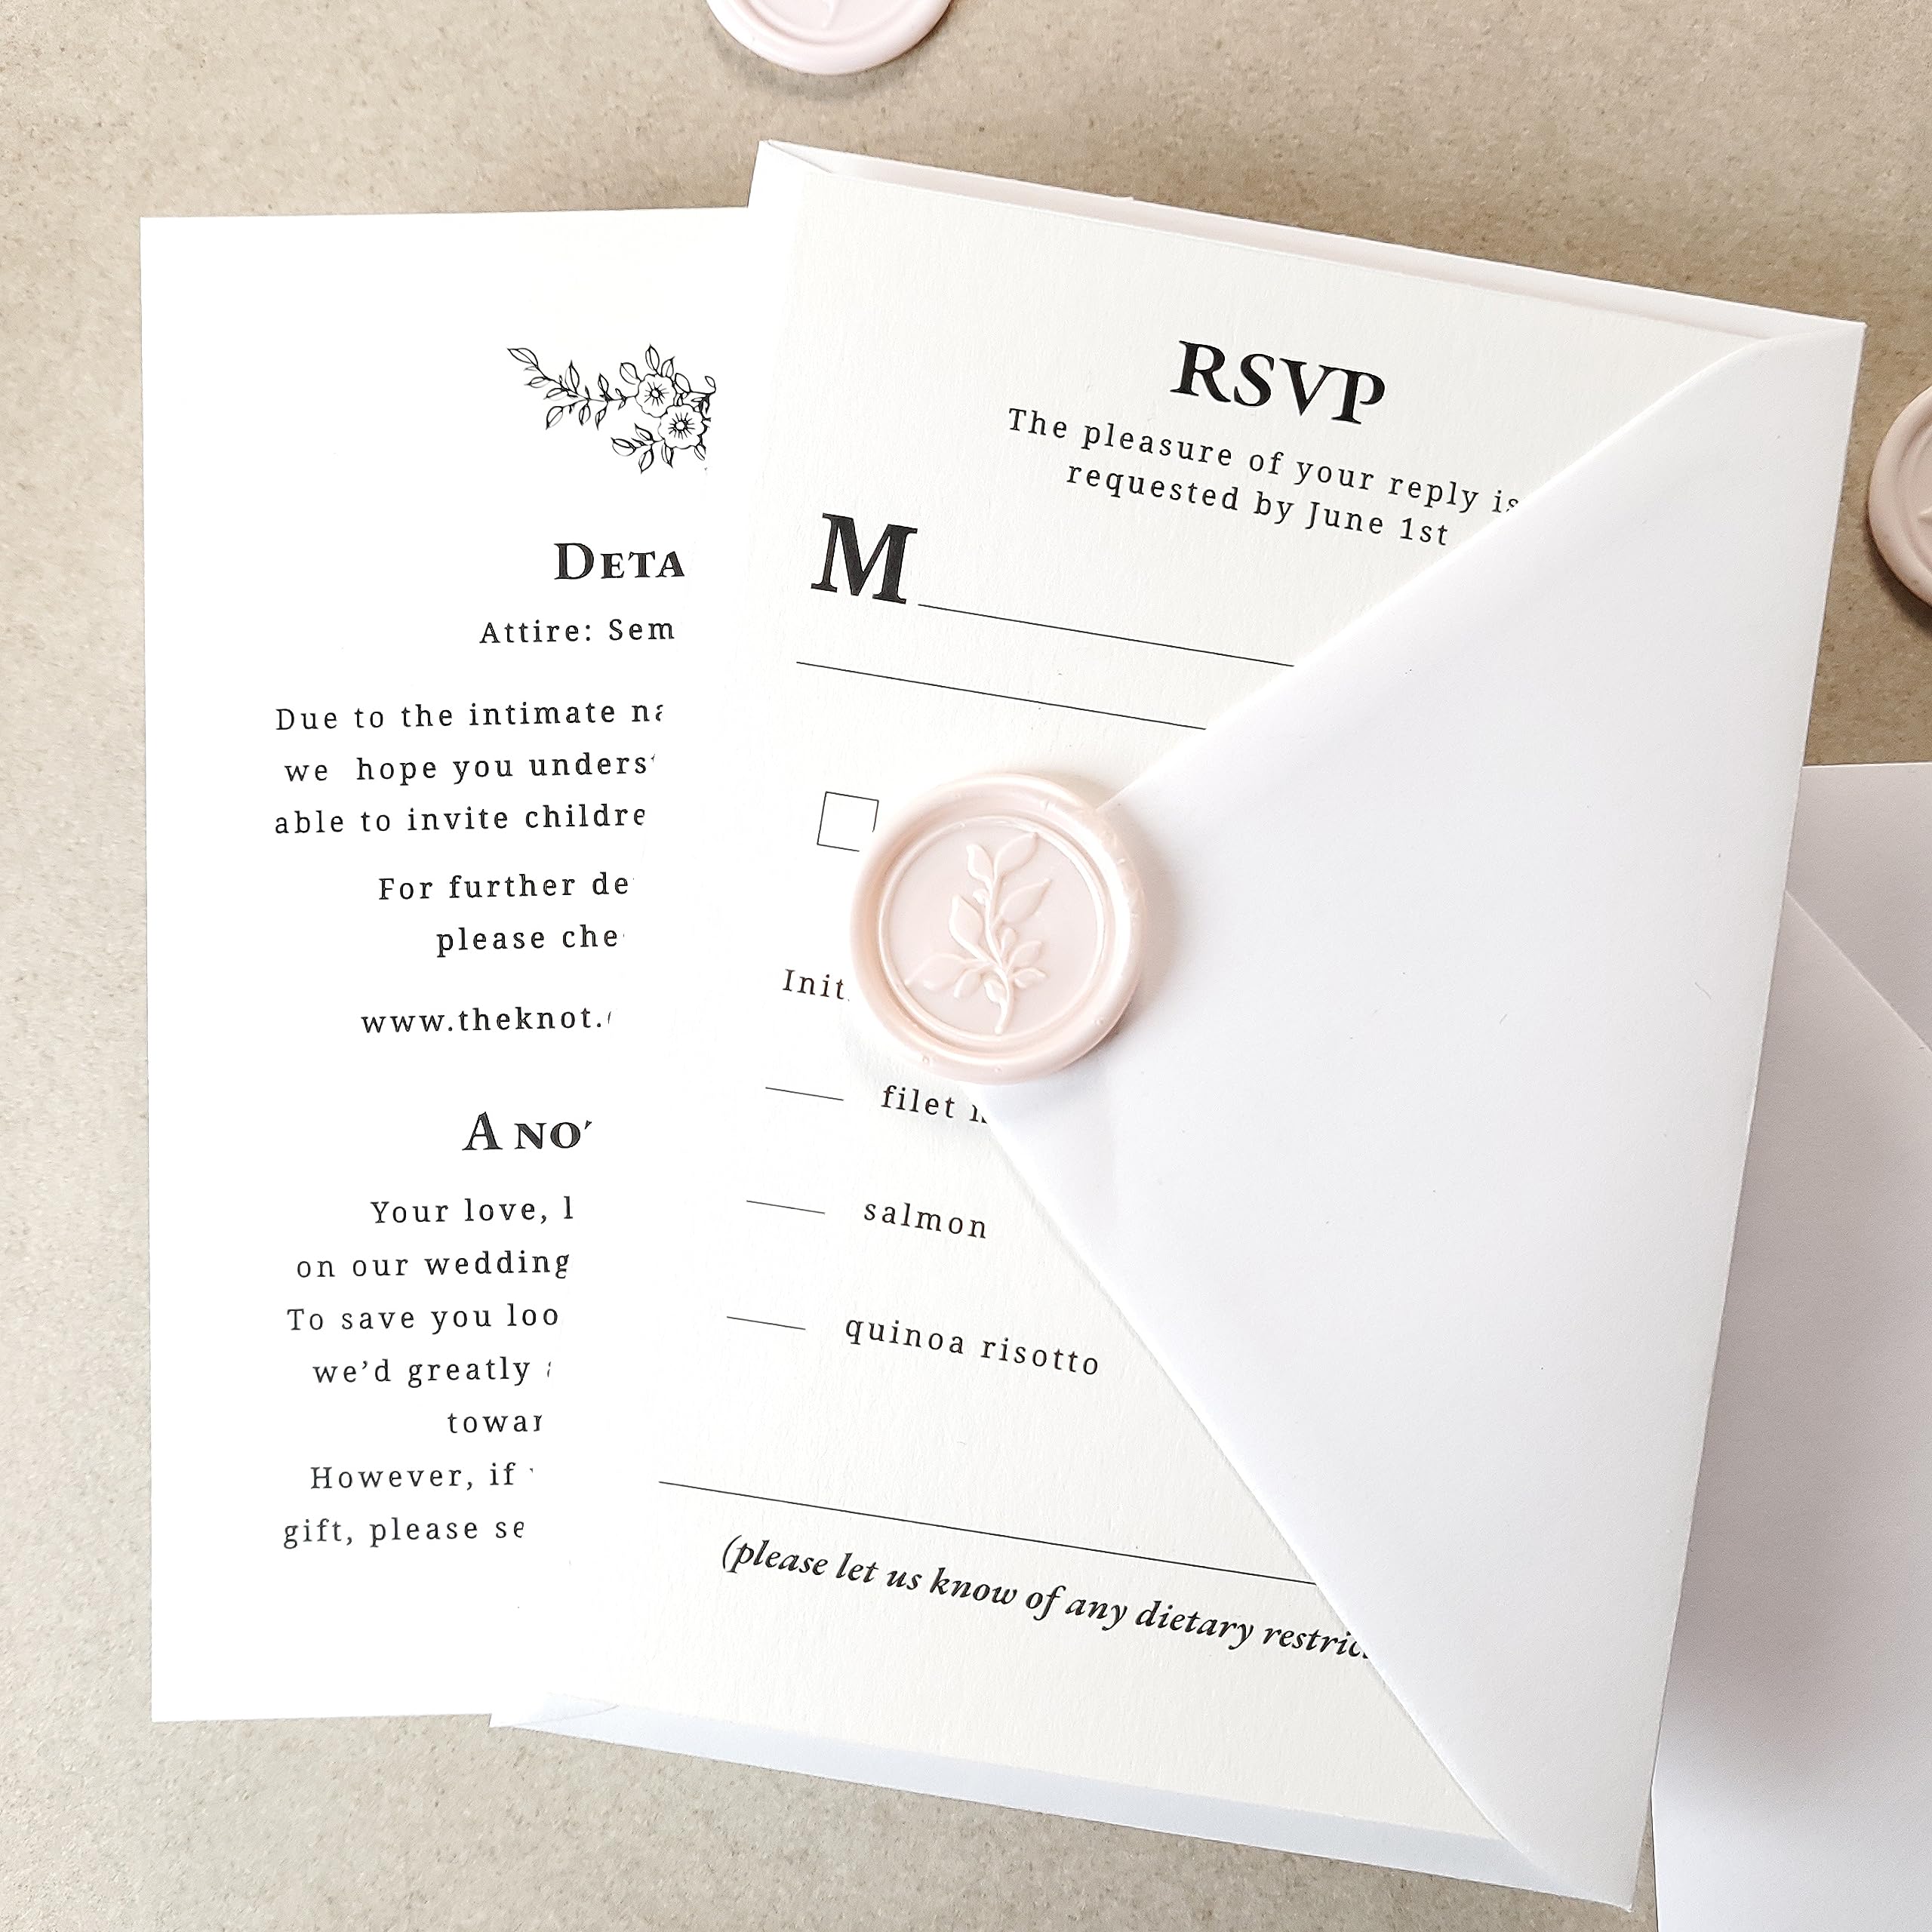 Set of 10 Modern 4x6 Wedding Invitations with RSVP Cards, Envelopes, Wedding Kit with Invites, Details card, QR Code Card, Belly Band, Response Cards, Vellum Wrap, Wax Seal (4